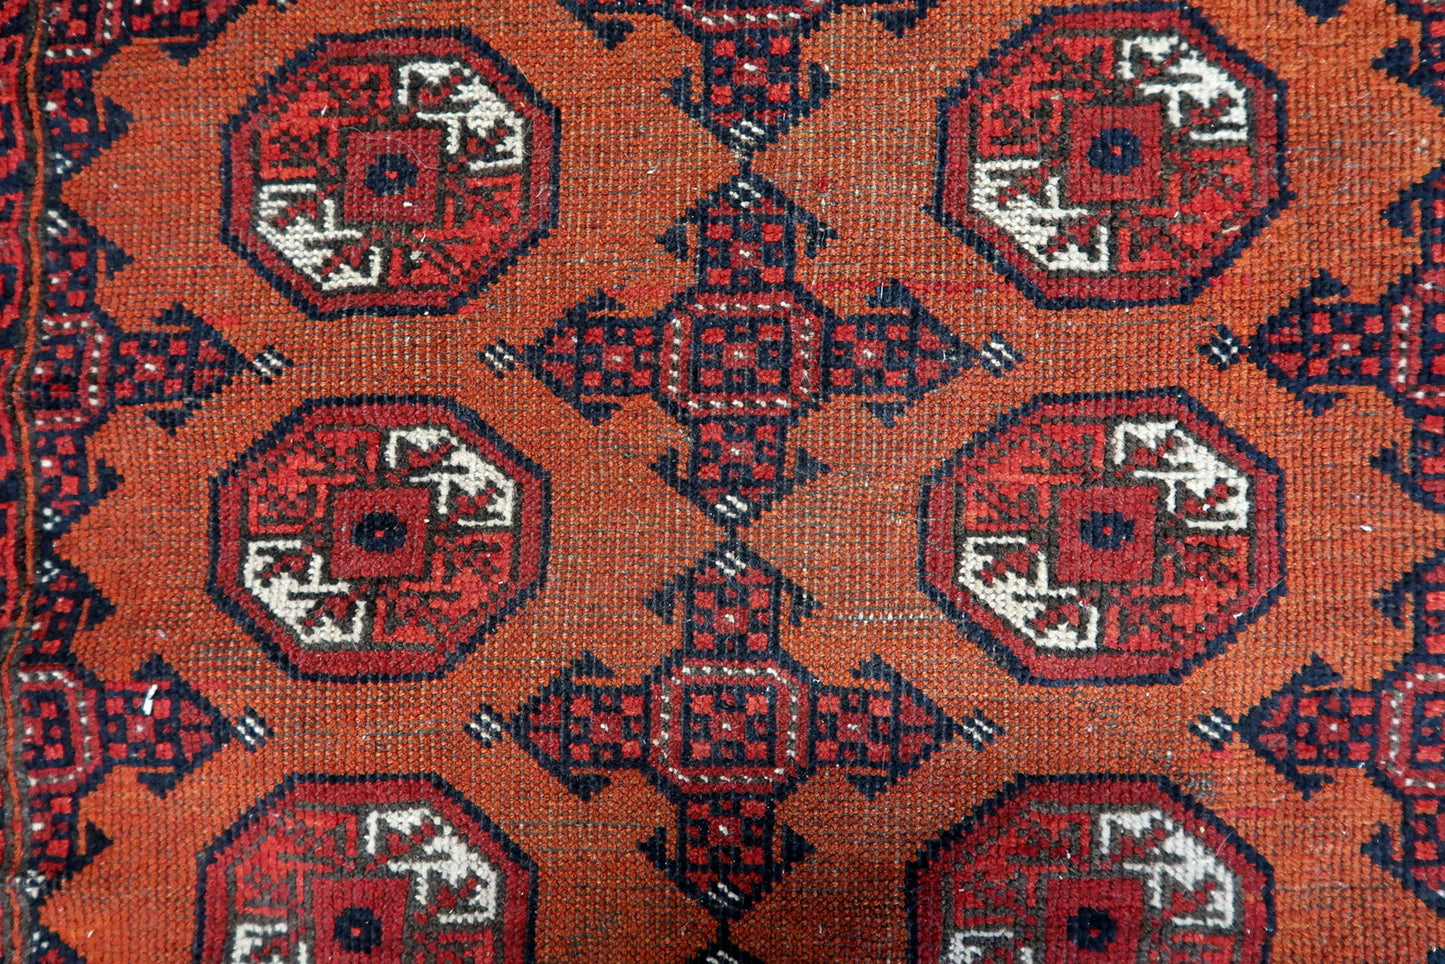 Close-up of wear and tear on Handmade Antique Afghan Baluch Rug - Detailed view highlighting the wear over time, contributing to the rug's character.